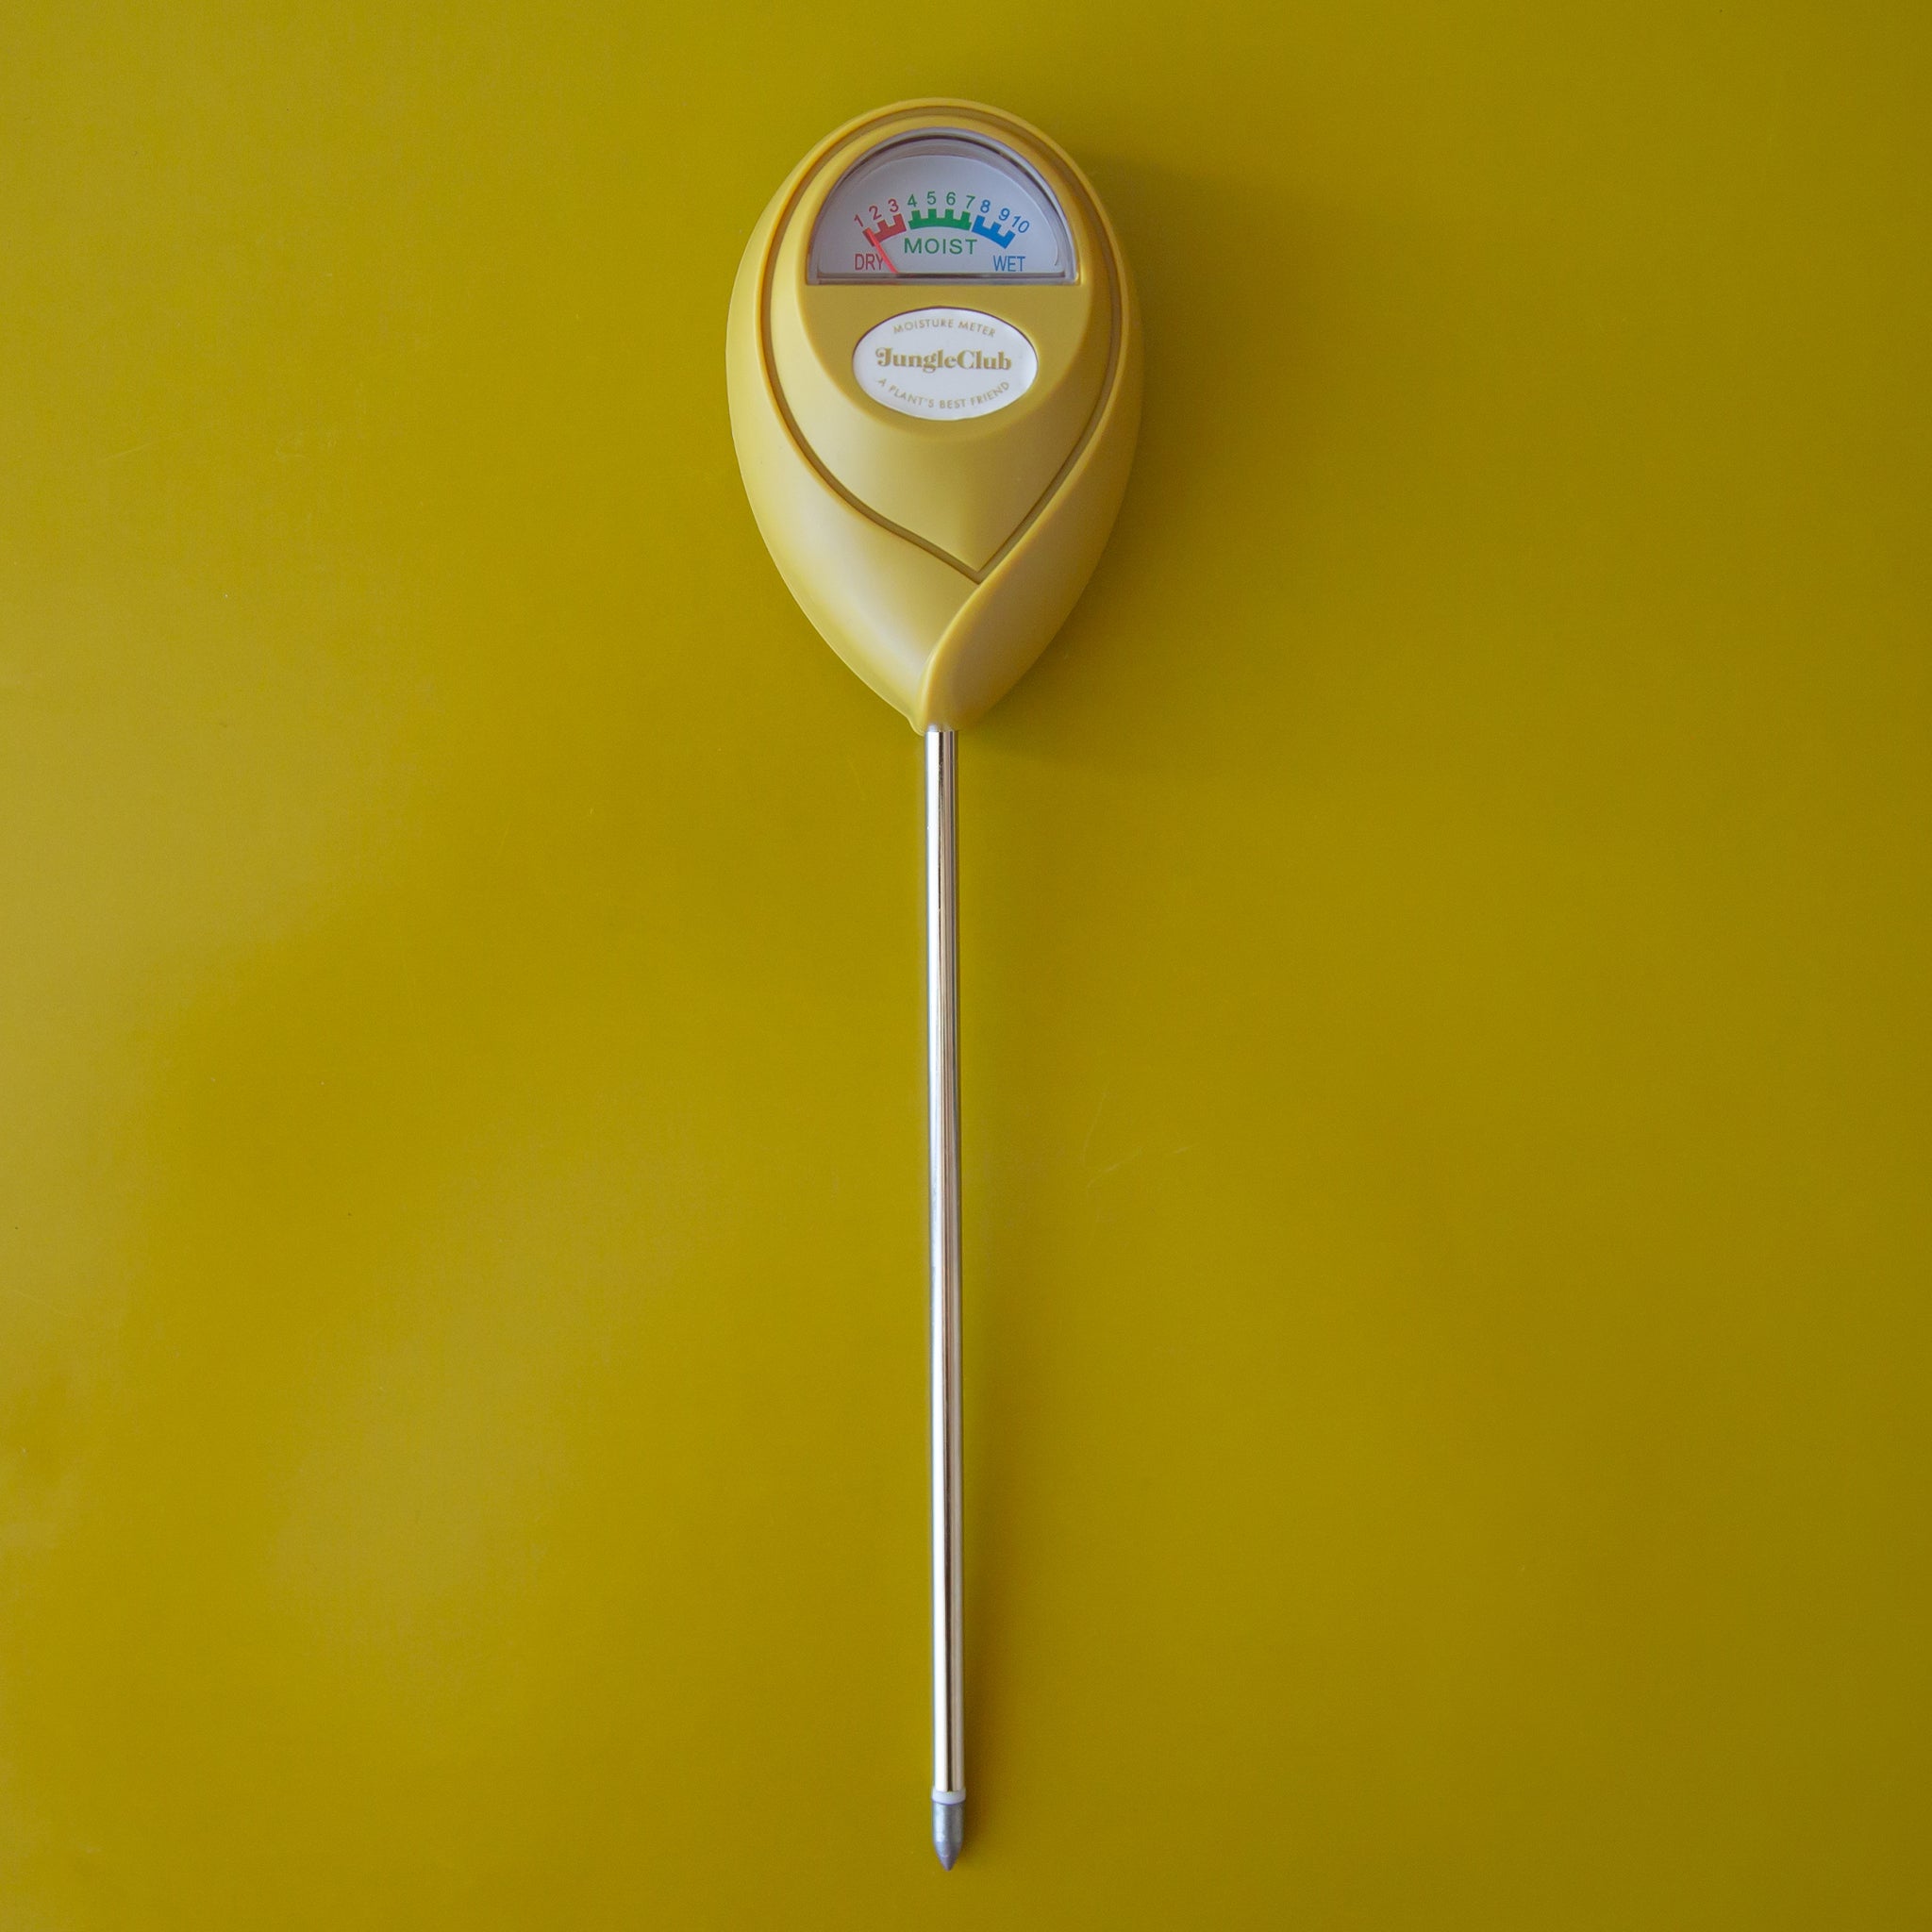 A chartreuse moisture meter with a rounded head and a white meter that ranges from dry, moist, or wet along with a small oval label in the front that reads, &quot;Jungle Club&quot;.